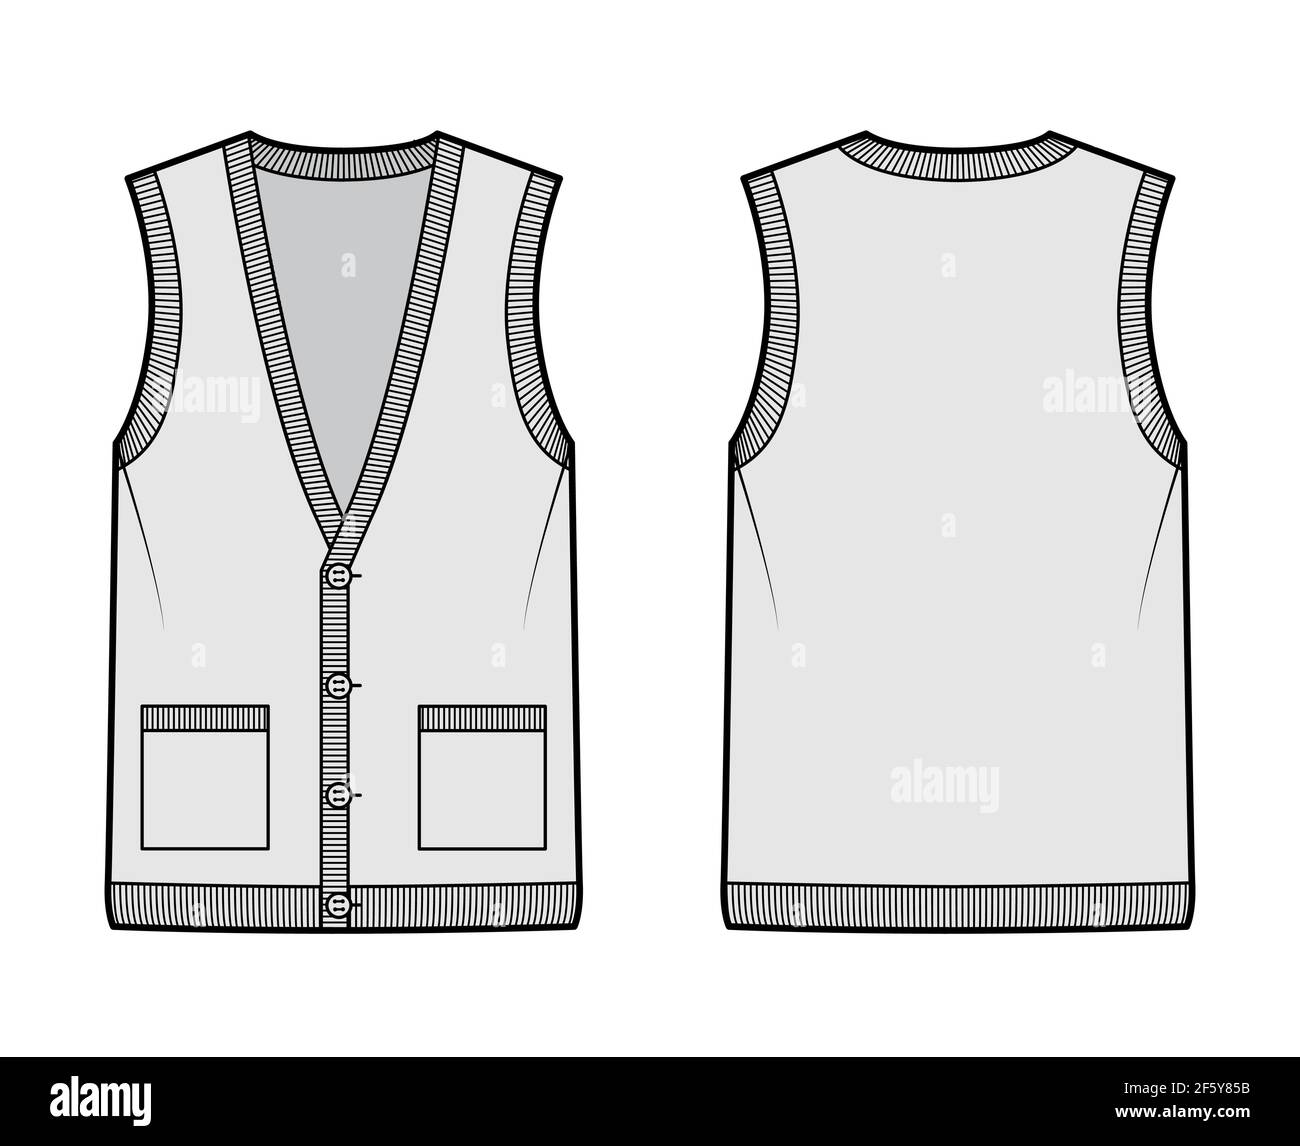 Cardigan vest sweater waistcoat technical fashion illustration with sleeveless, rib knit V-neckline, button closure, pockets. Flat template front, back, grey color. Women, men, unisex top CAD mockup Stock Vector